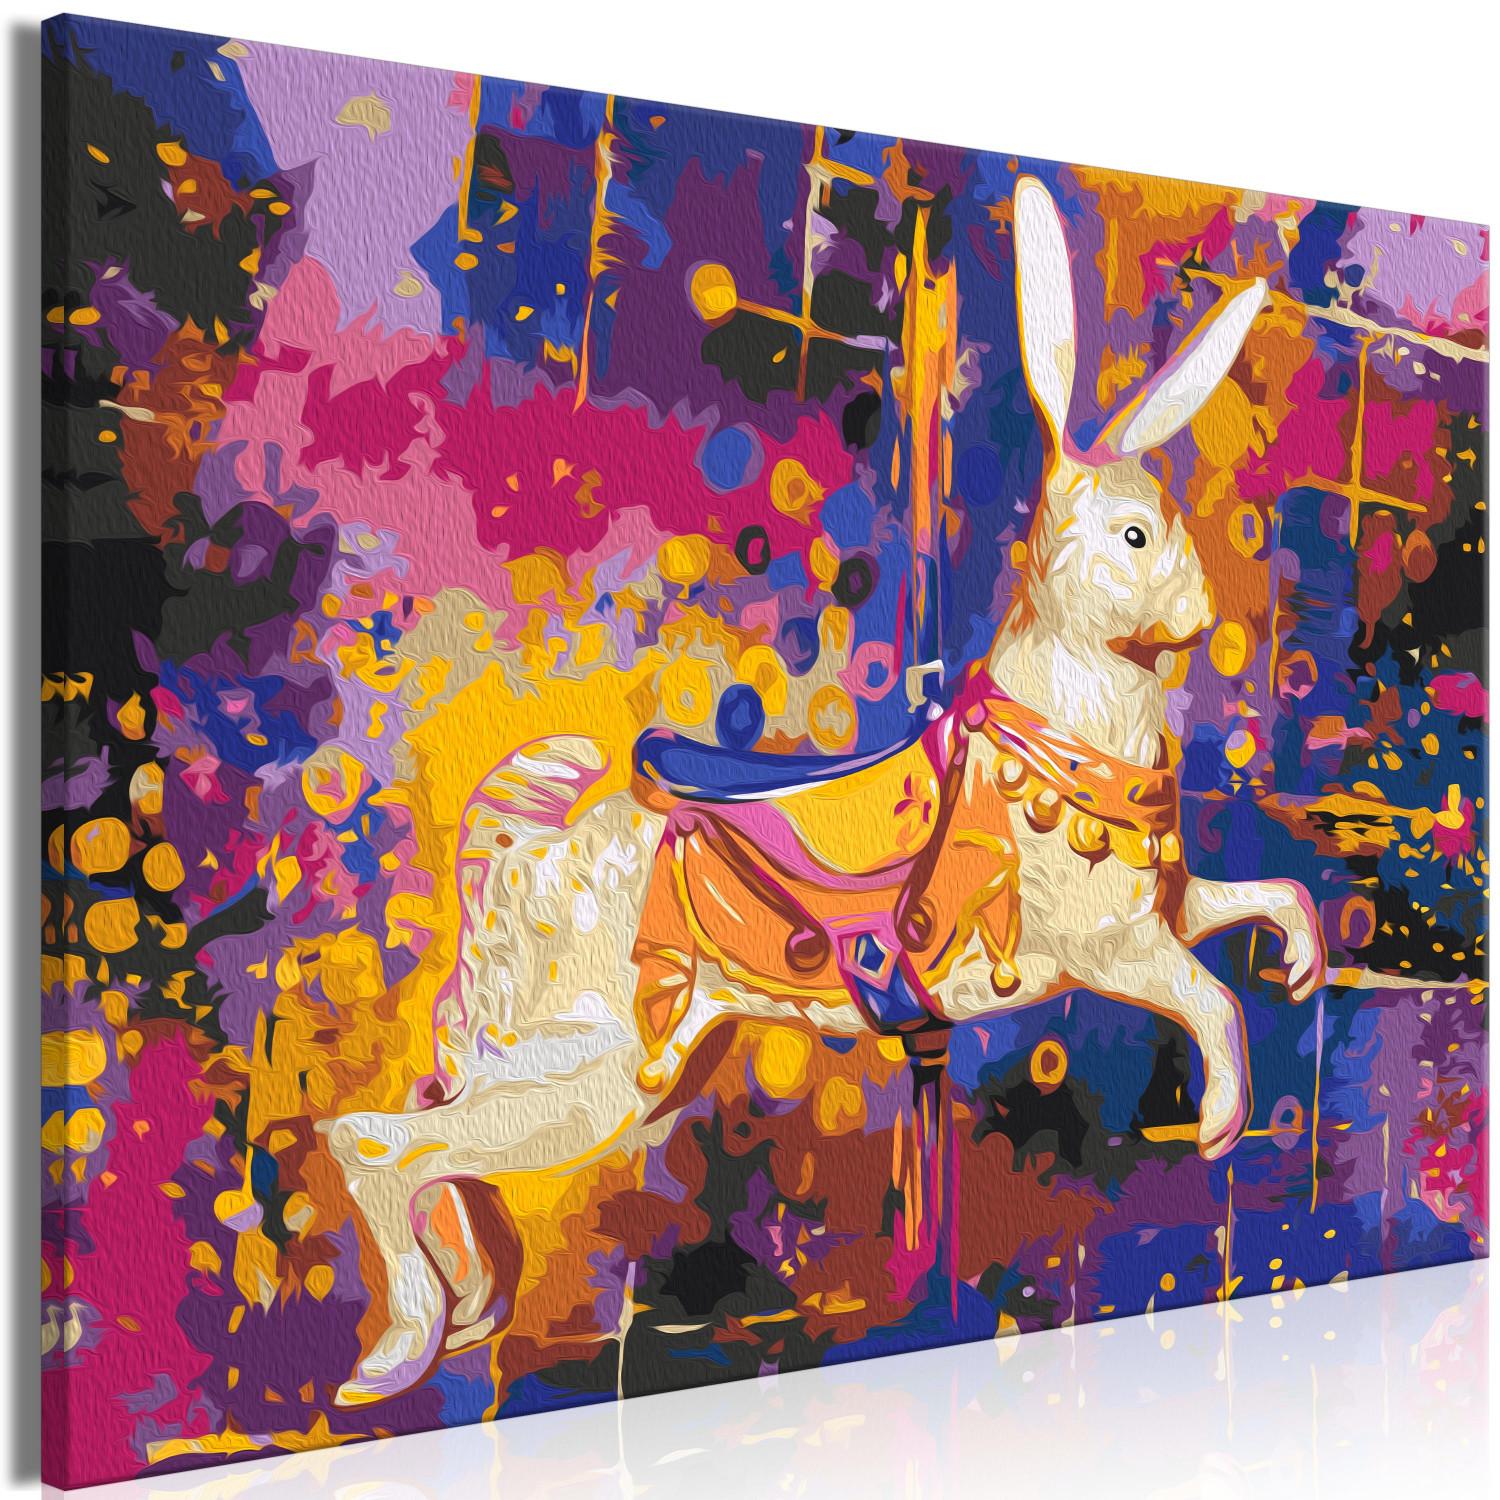 Paint by Number Kit Wonderland Rabbit - Artistic Abstraction With a Dressed Animal